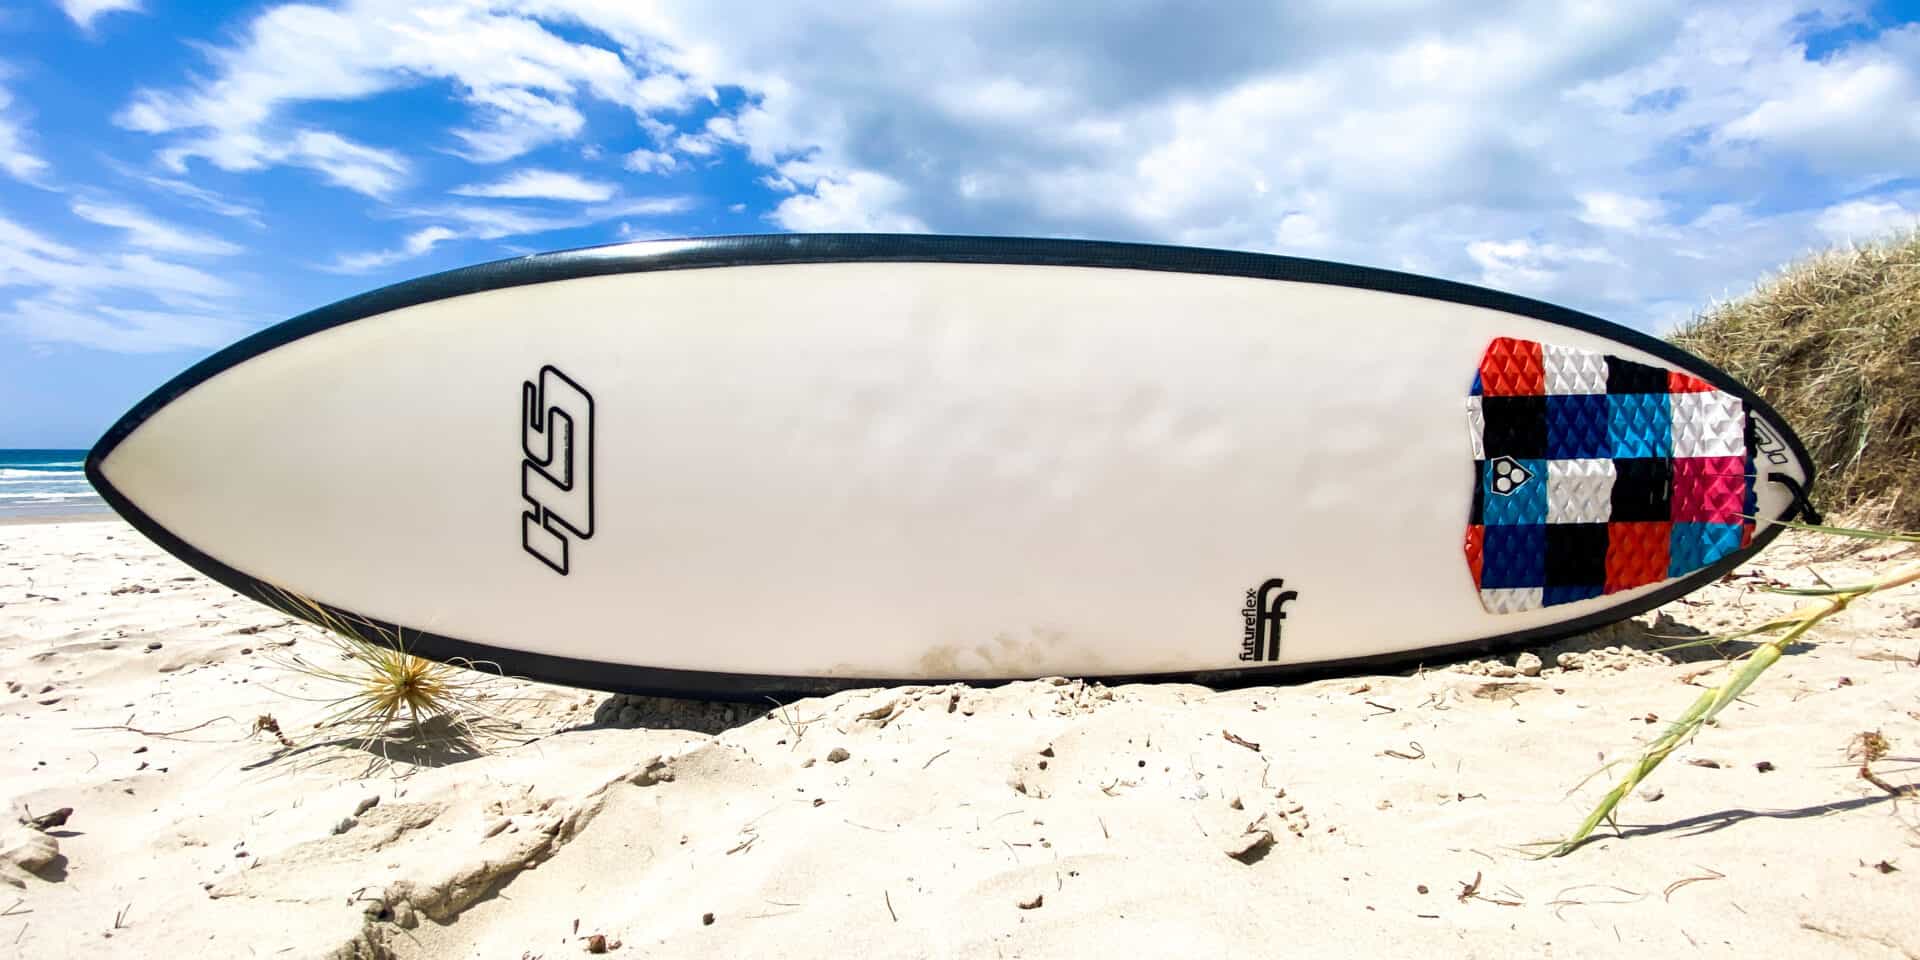 Hypto Krypto - Is It Worth The Hype? (+ 4 Other Surfboards To